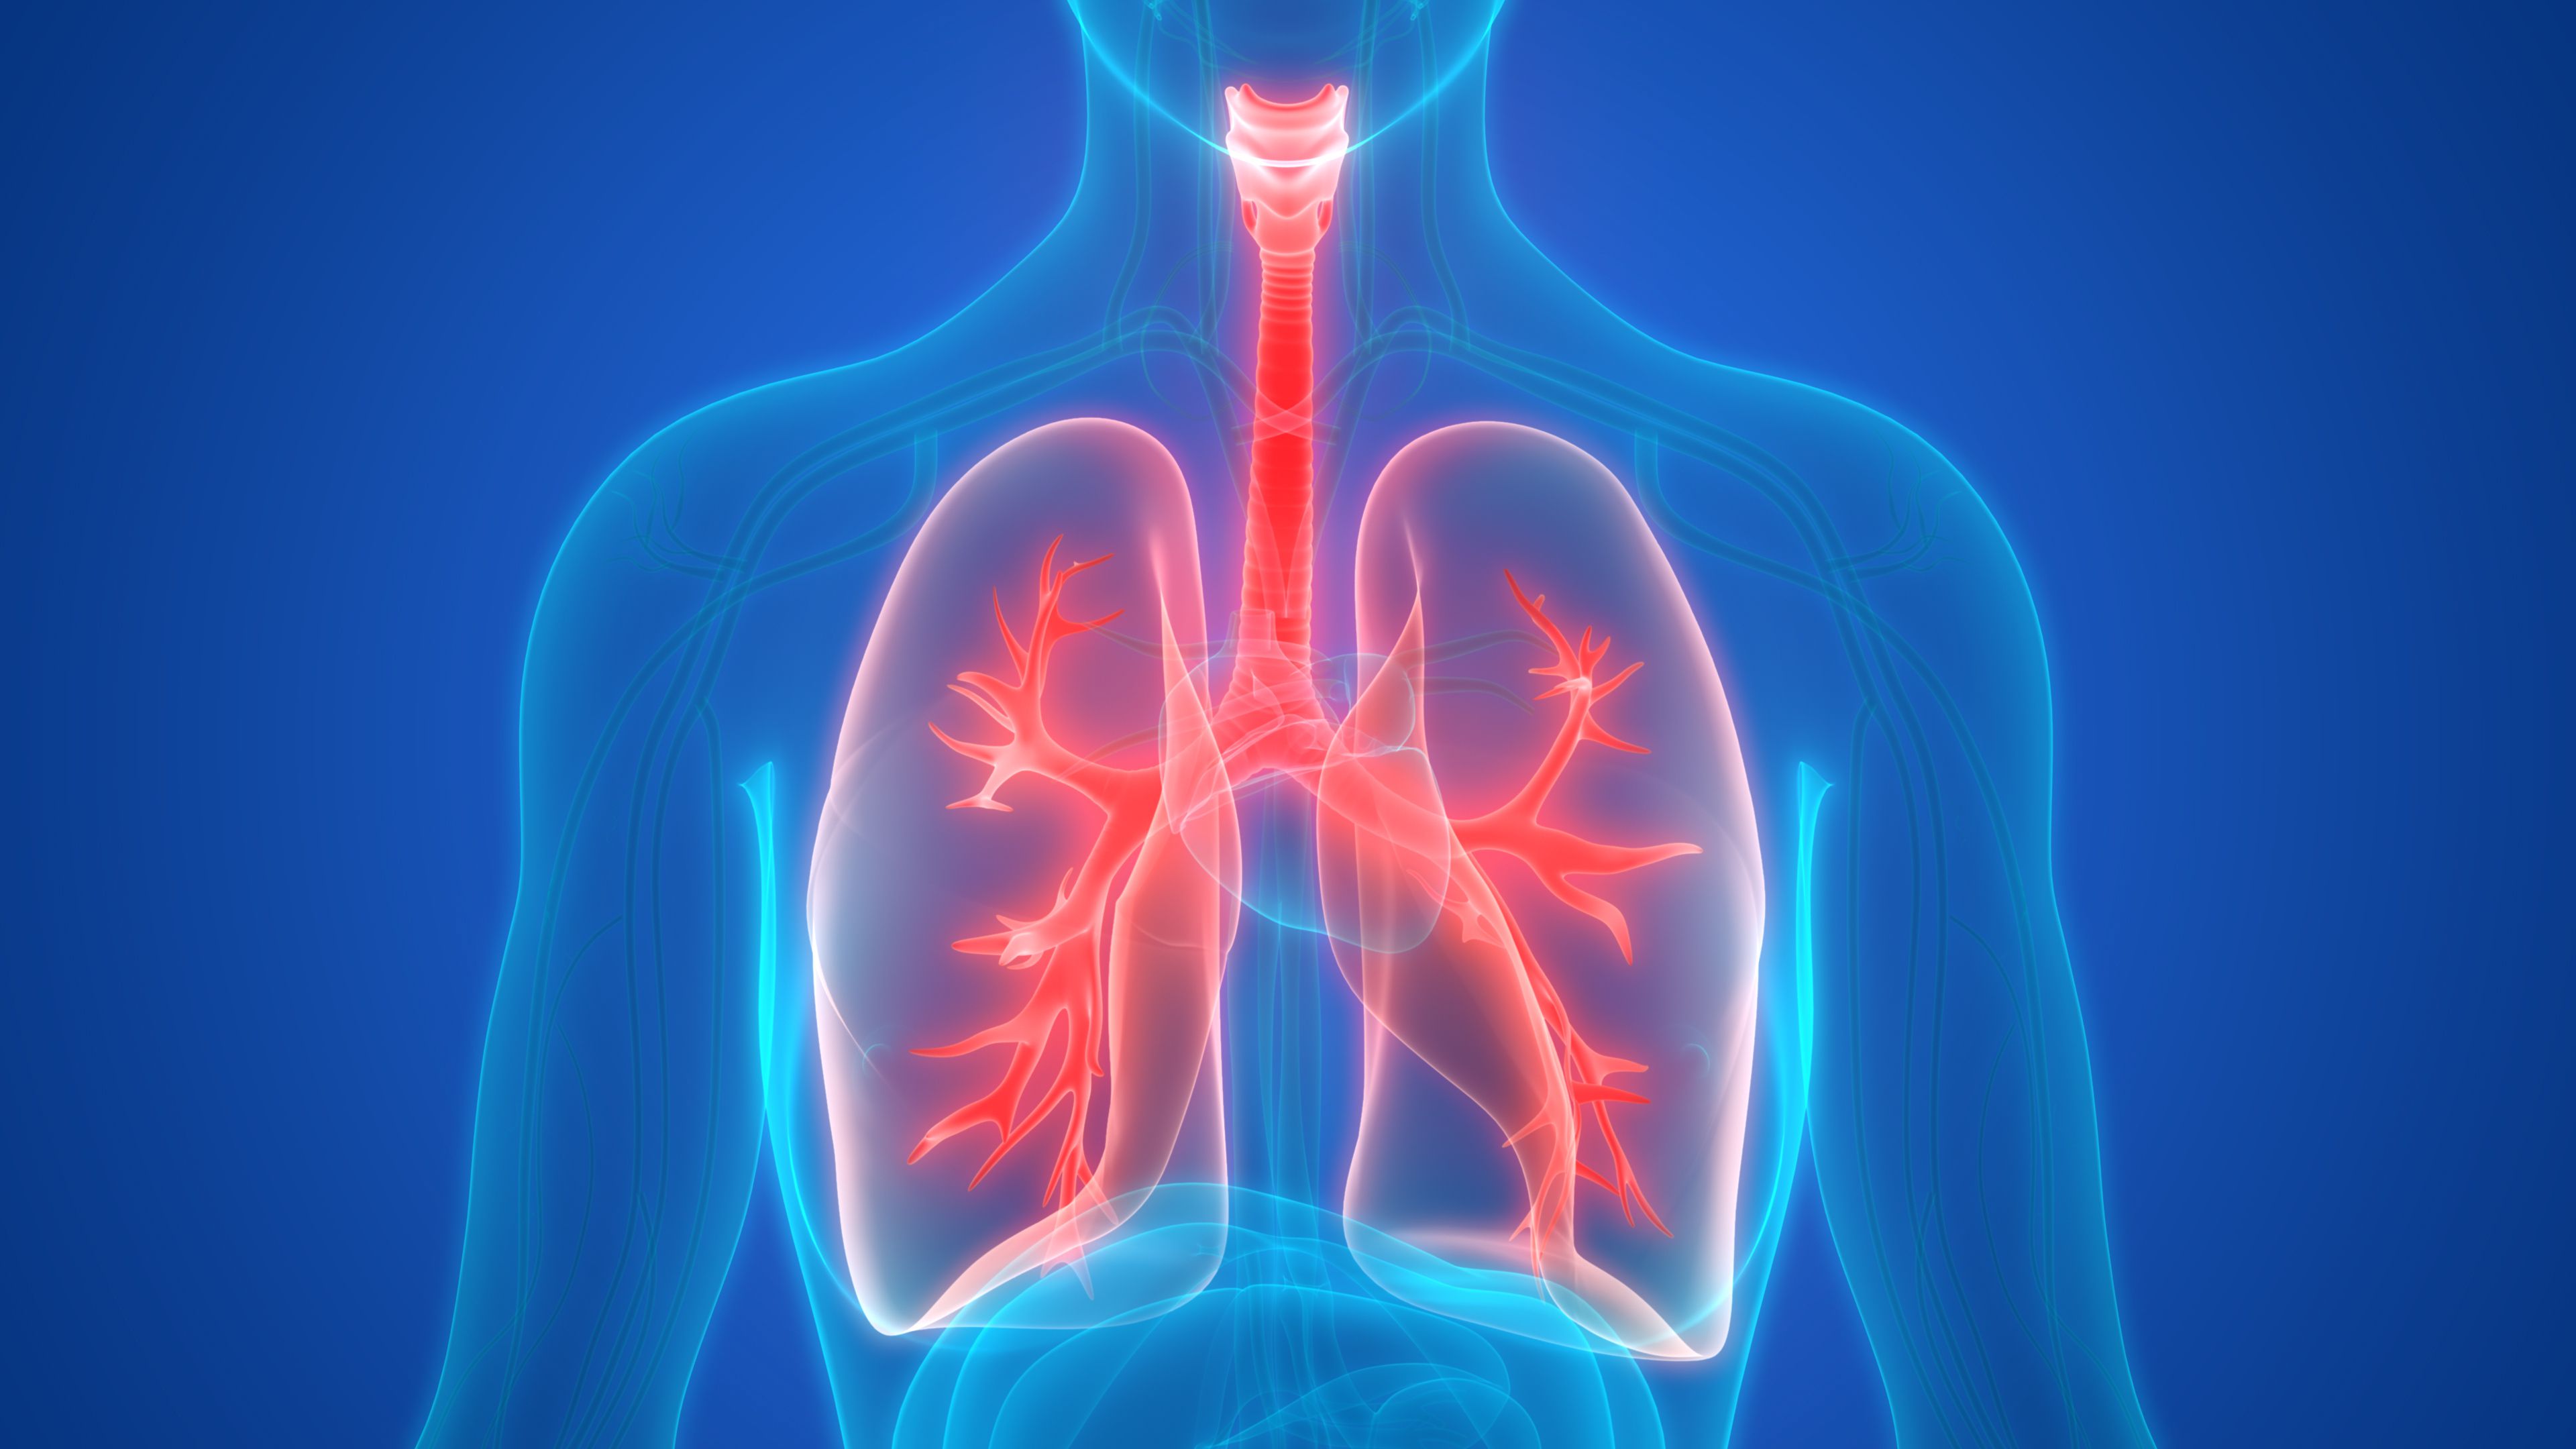 What are the symptoms of lung cancer?